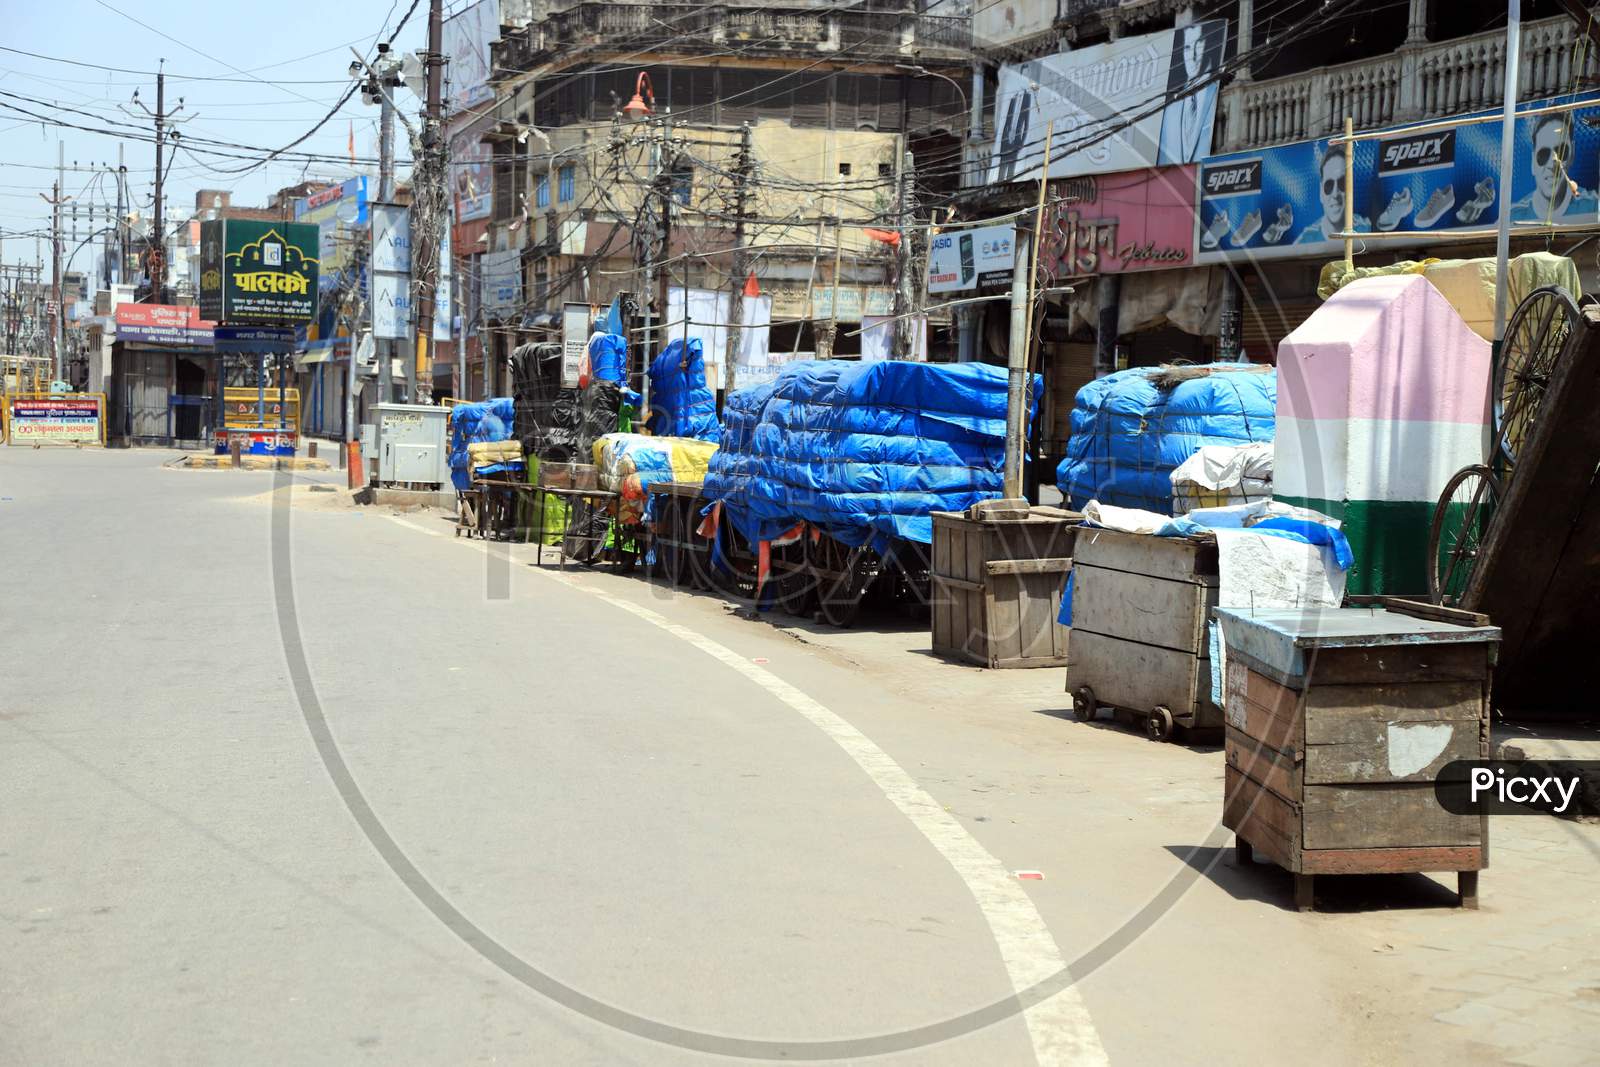 A View Of Closed Road Side Shop During A Nationwide Lockdown To Slow The Spreading Of The Coronavirus Disease (Covid-19), In Prayagraj, April, 18, 2020.